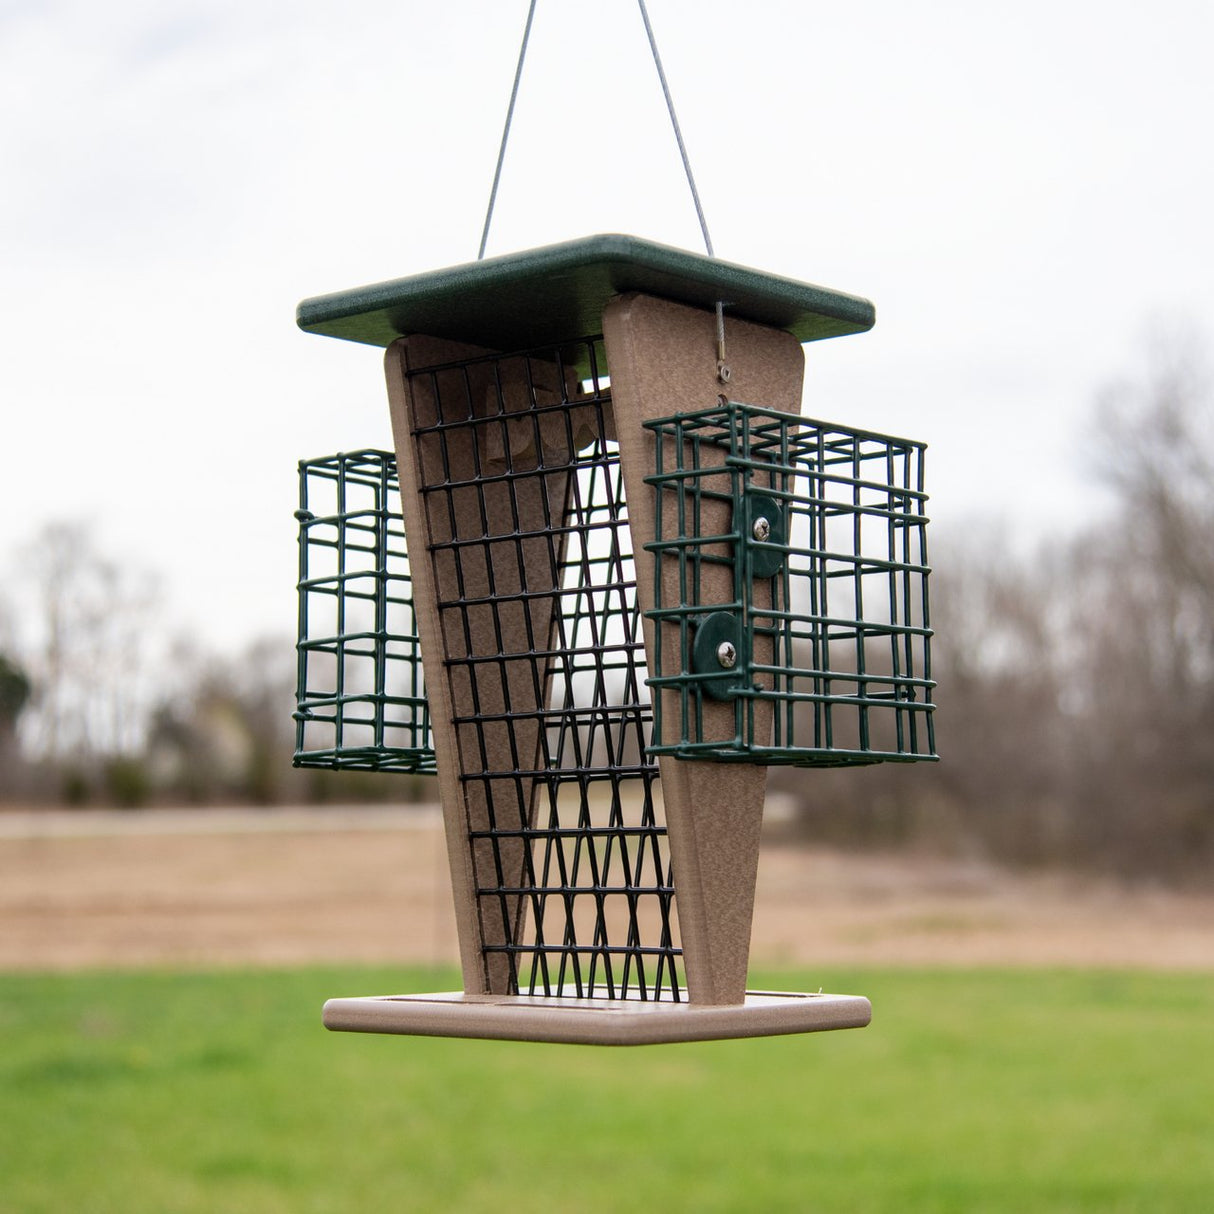 JCS Wildlife Whole Peanut Feeder With 2 Suet Cages - Great for Woodpeckers and Peanut Loving Birds! - JCS Wildlife